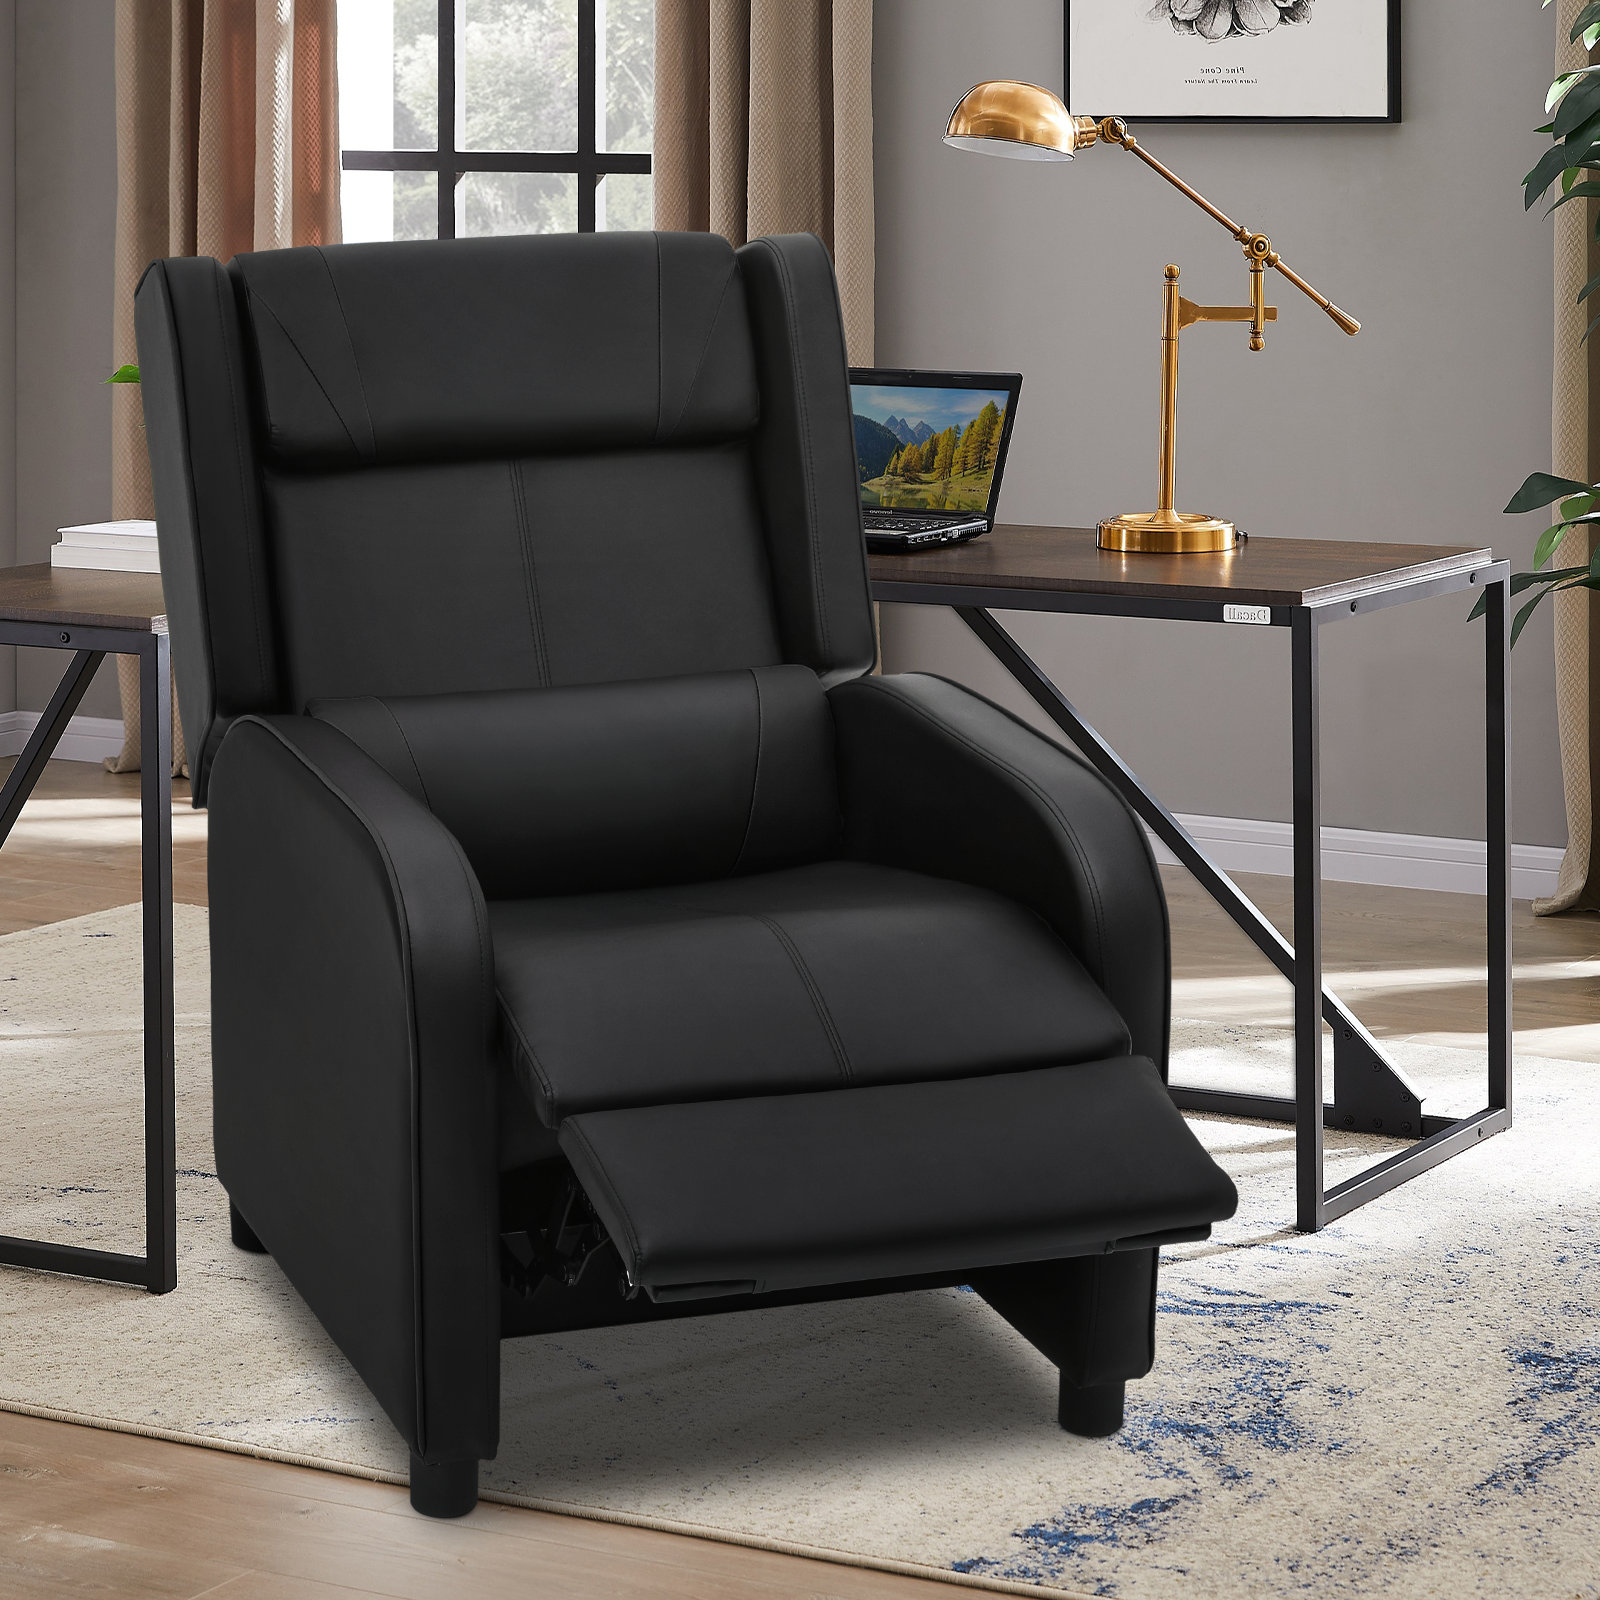 Magshion Massage Gaming Chair Recliner, PU Leather Adjustable Reclining Gaming Chair Sofa with Footrest, Lumbar Support and Headrest for Living Room